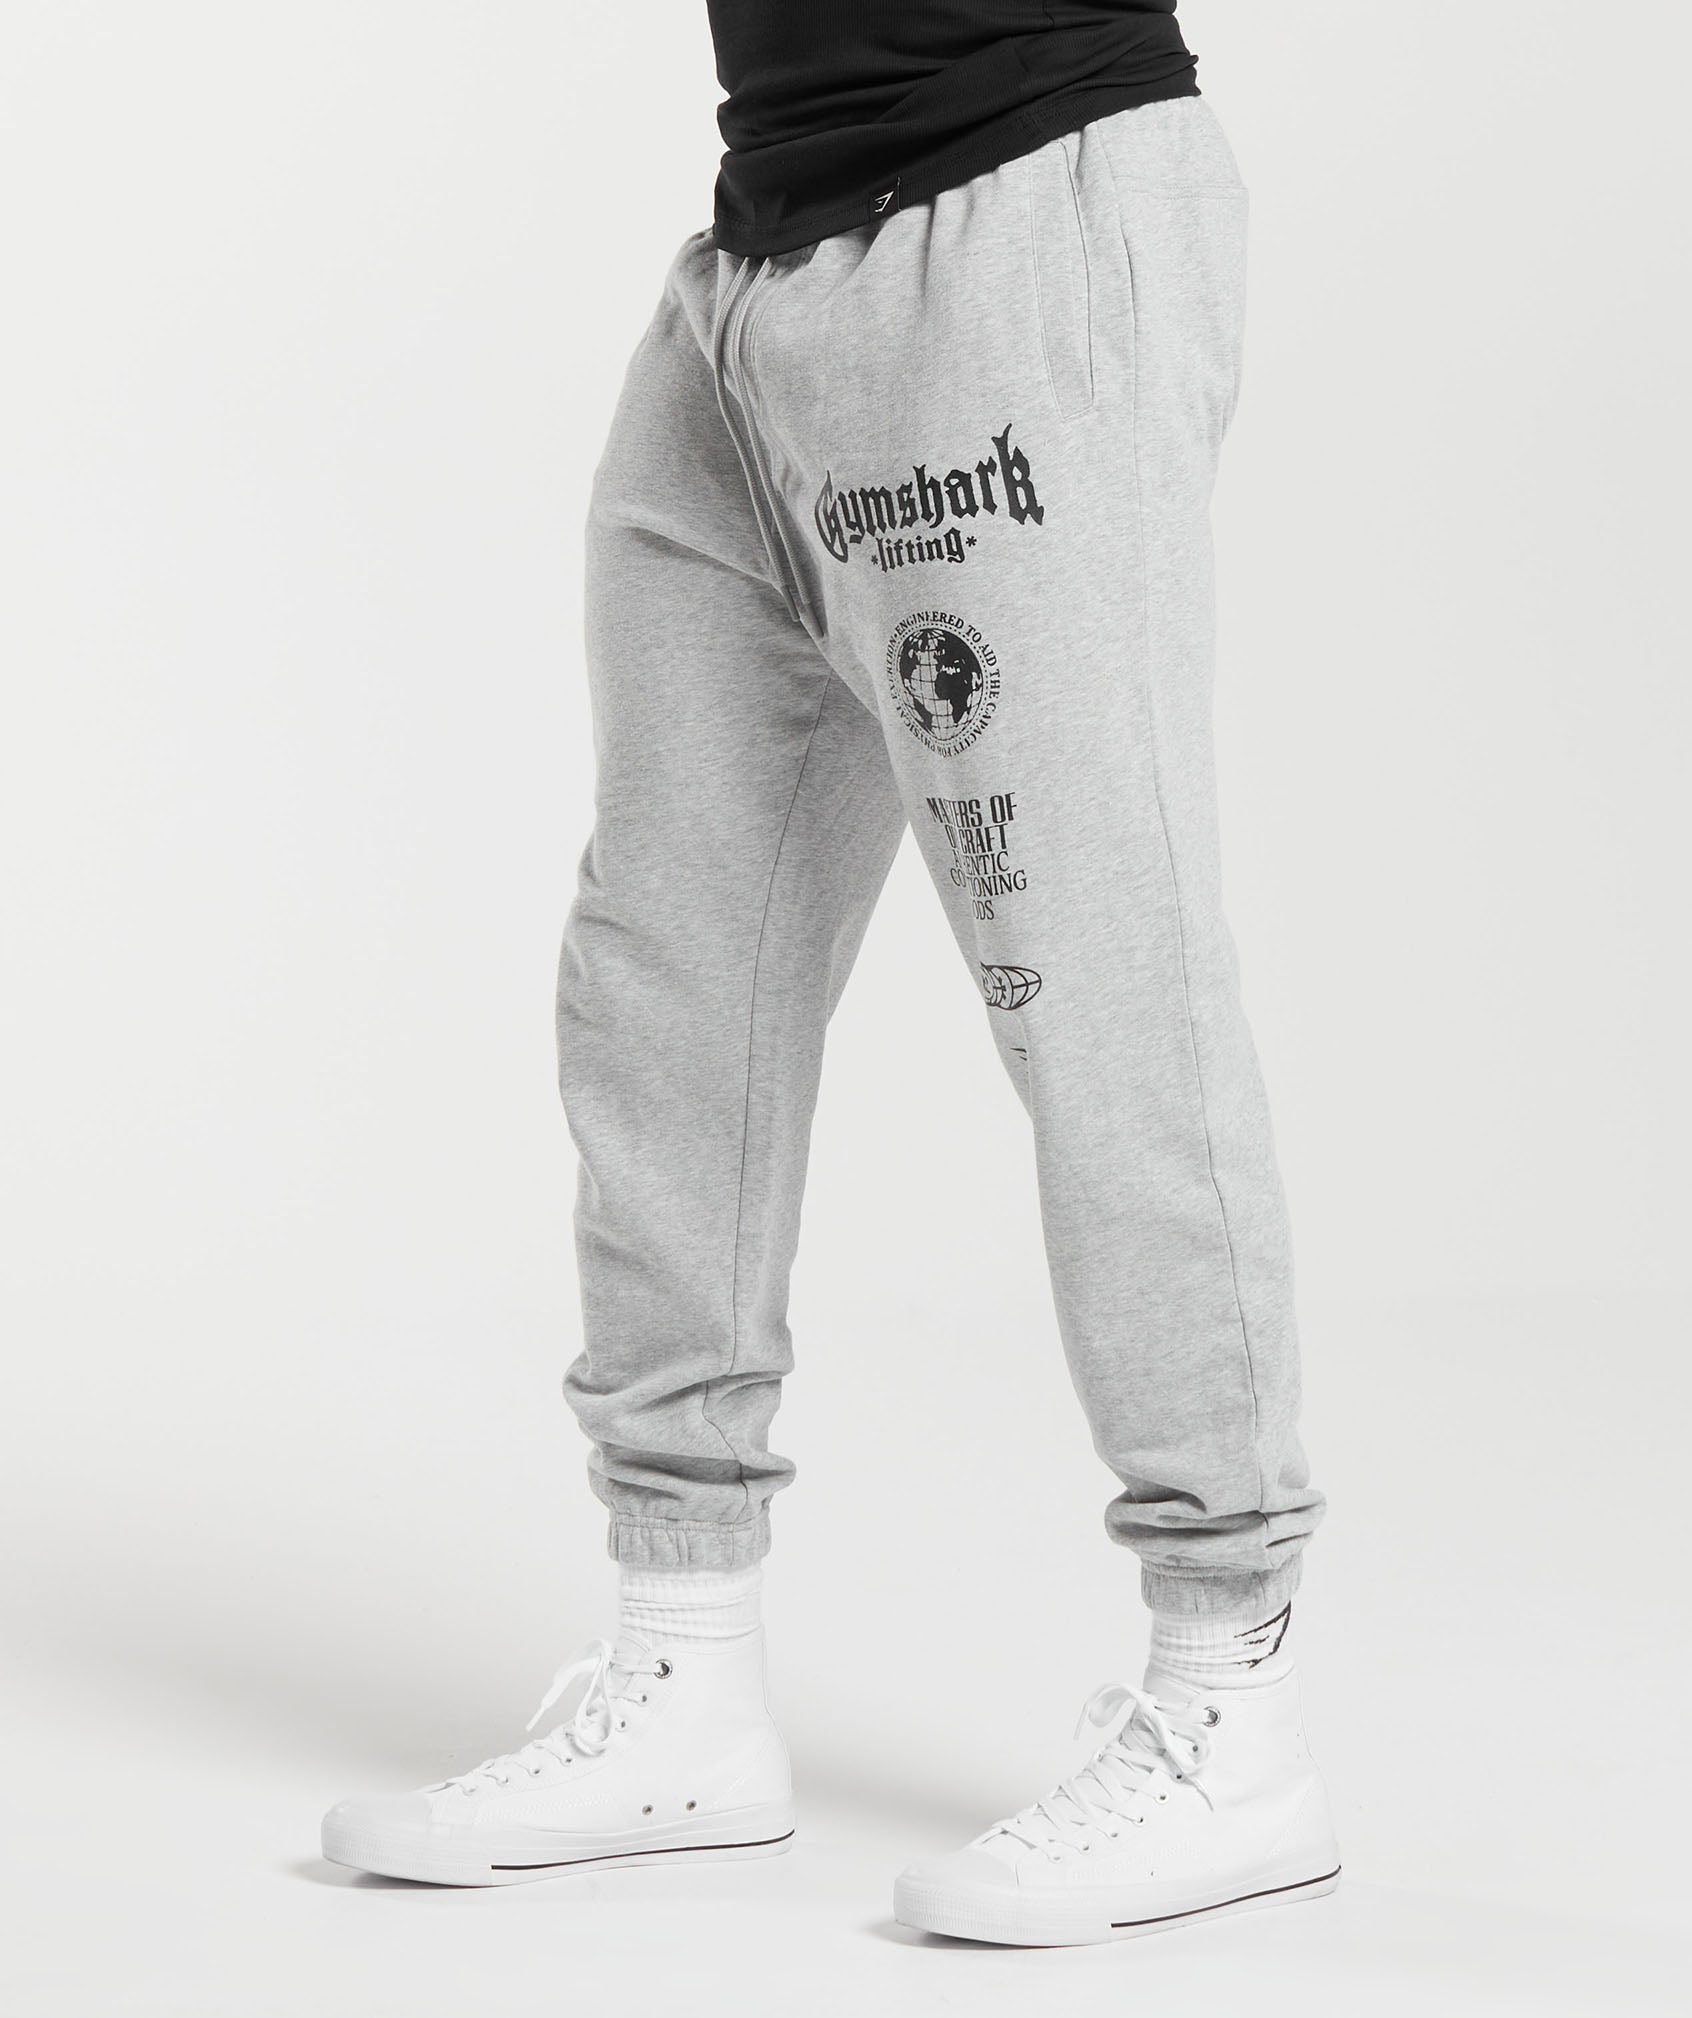 Global Lifting Oversized Joggers in Grey - view 3